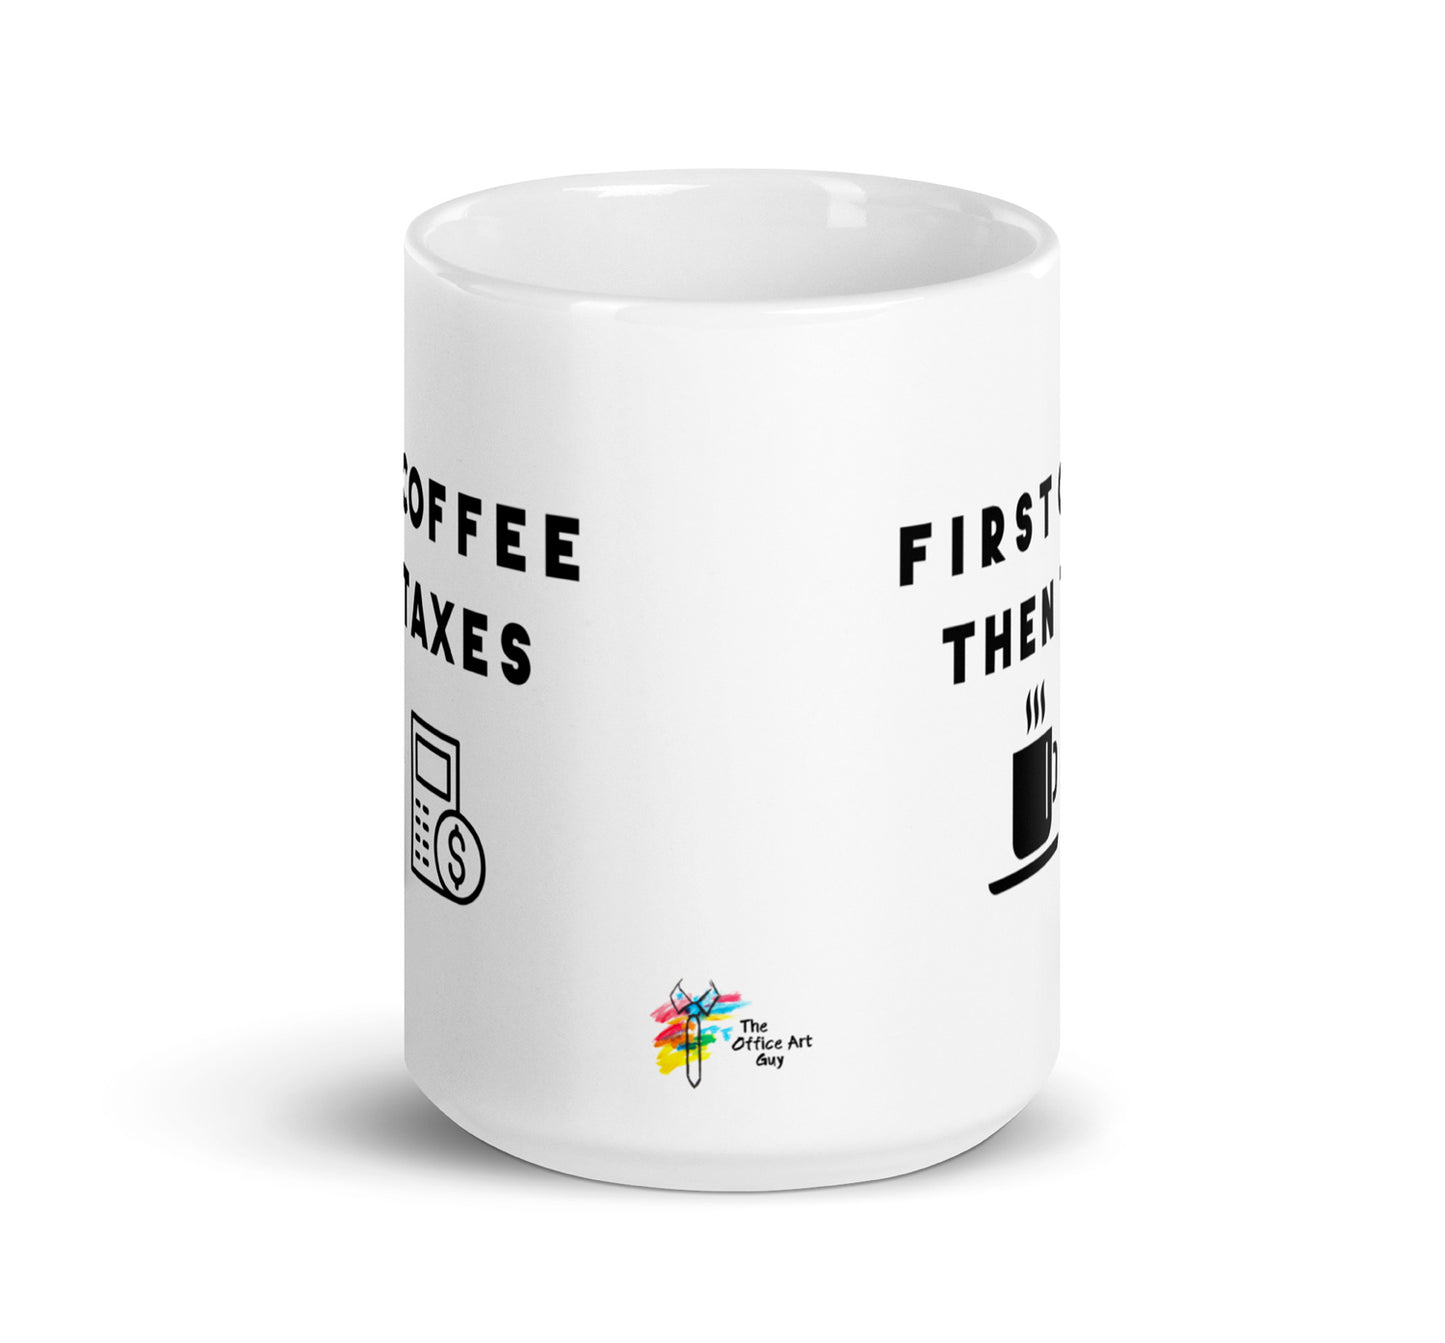 Tax Coffee Mug - First Coffee, Then Taxes - Funny Work Gift for Accountants